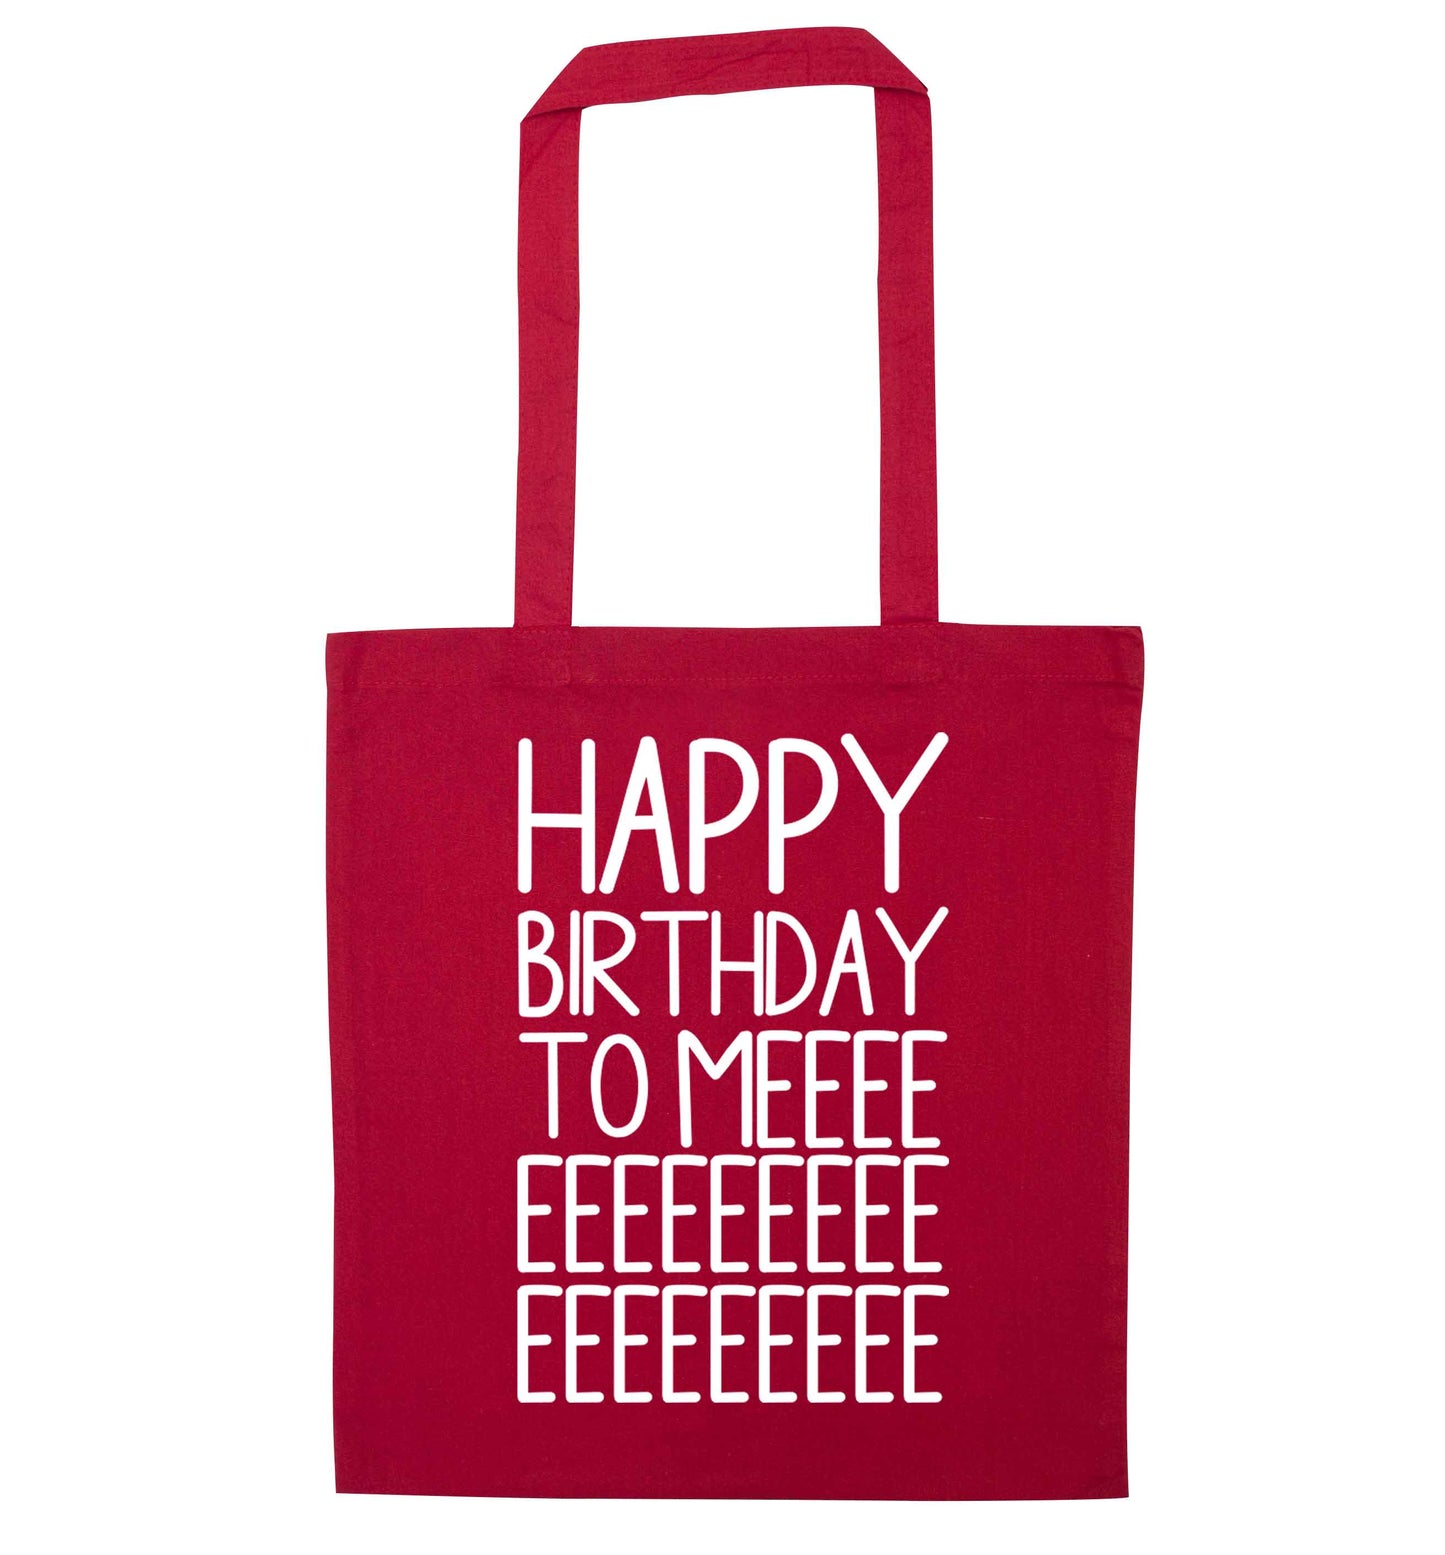 Happy birthday to me red tote bag